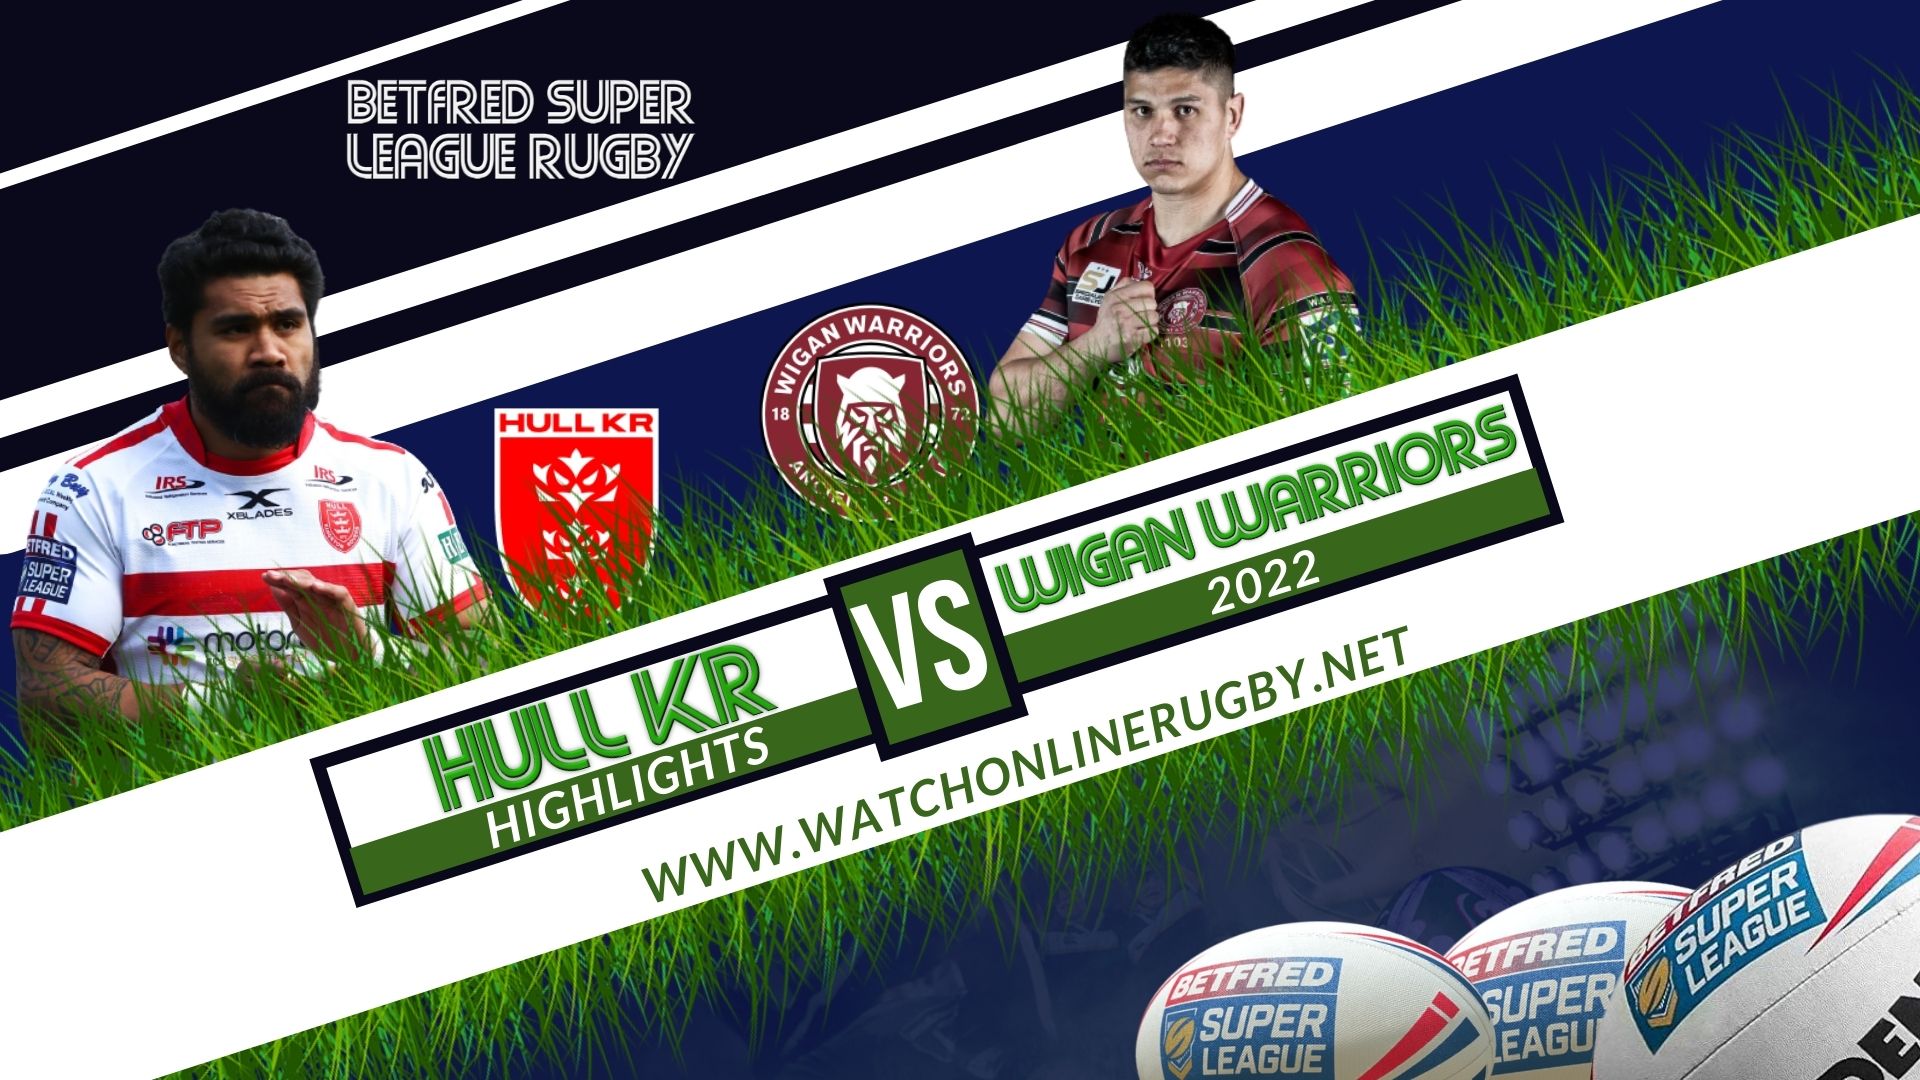 Hull KR Vs Wigan Warriors Super League Rugby 2022 RD 1